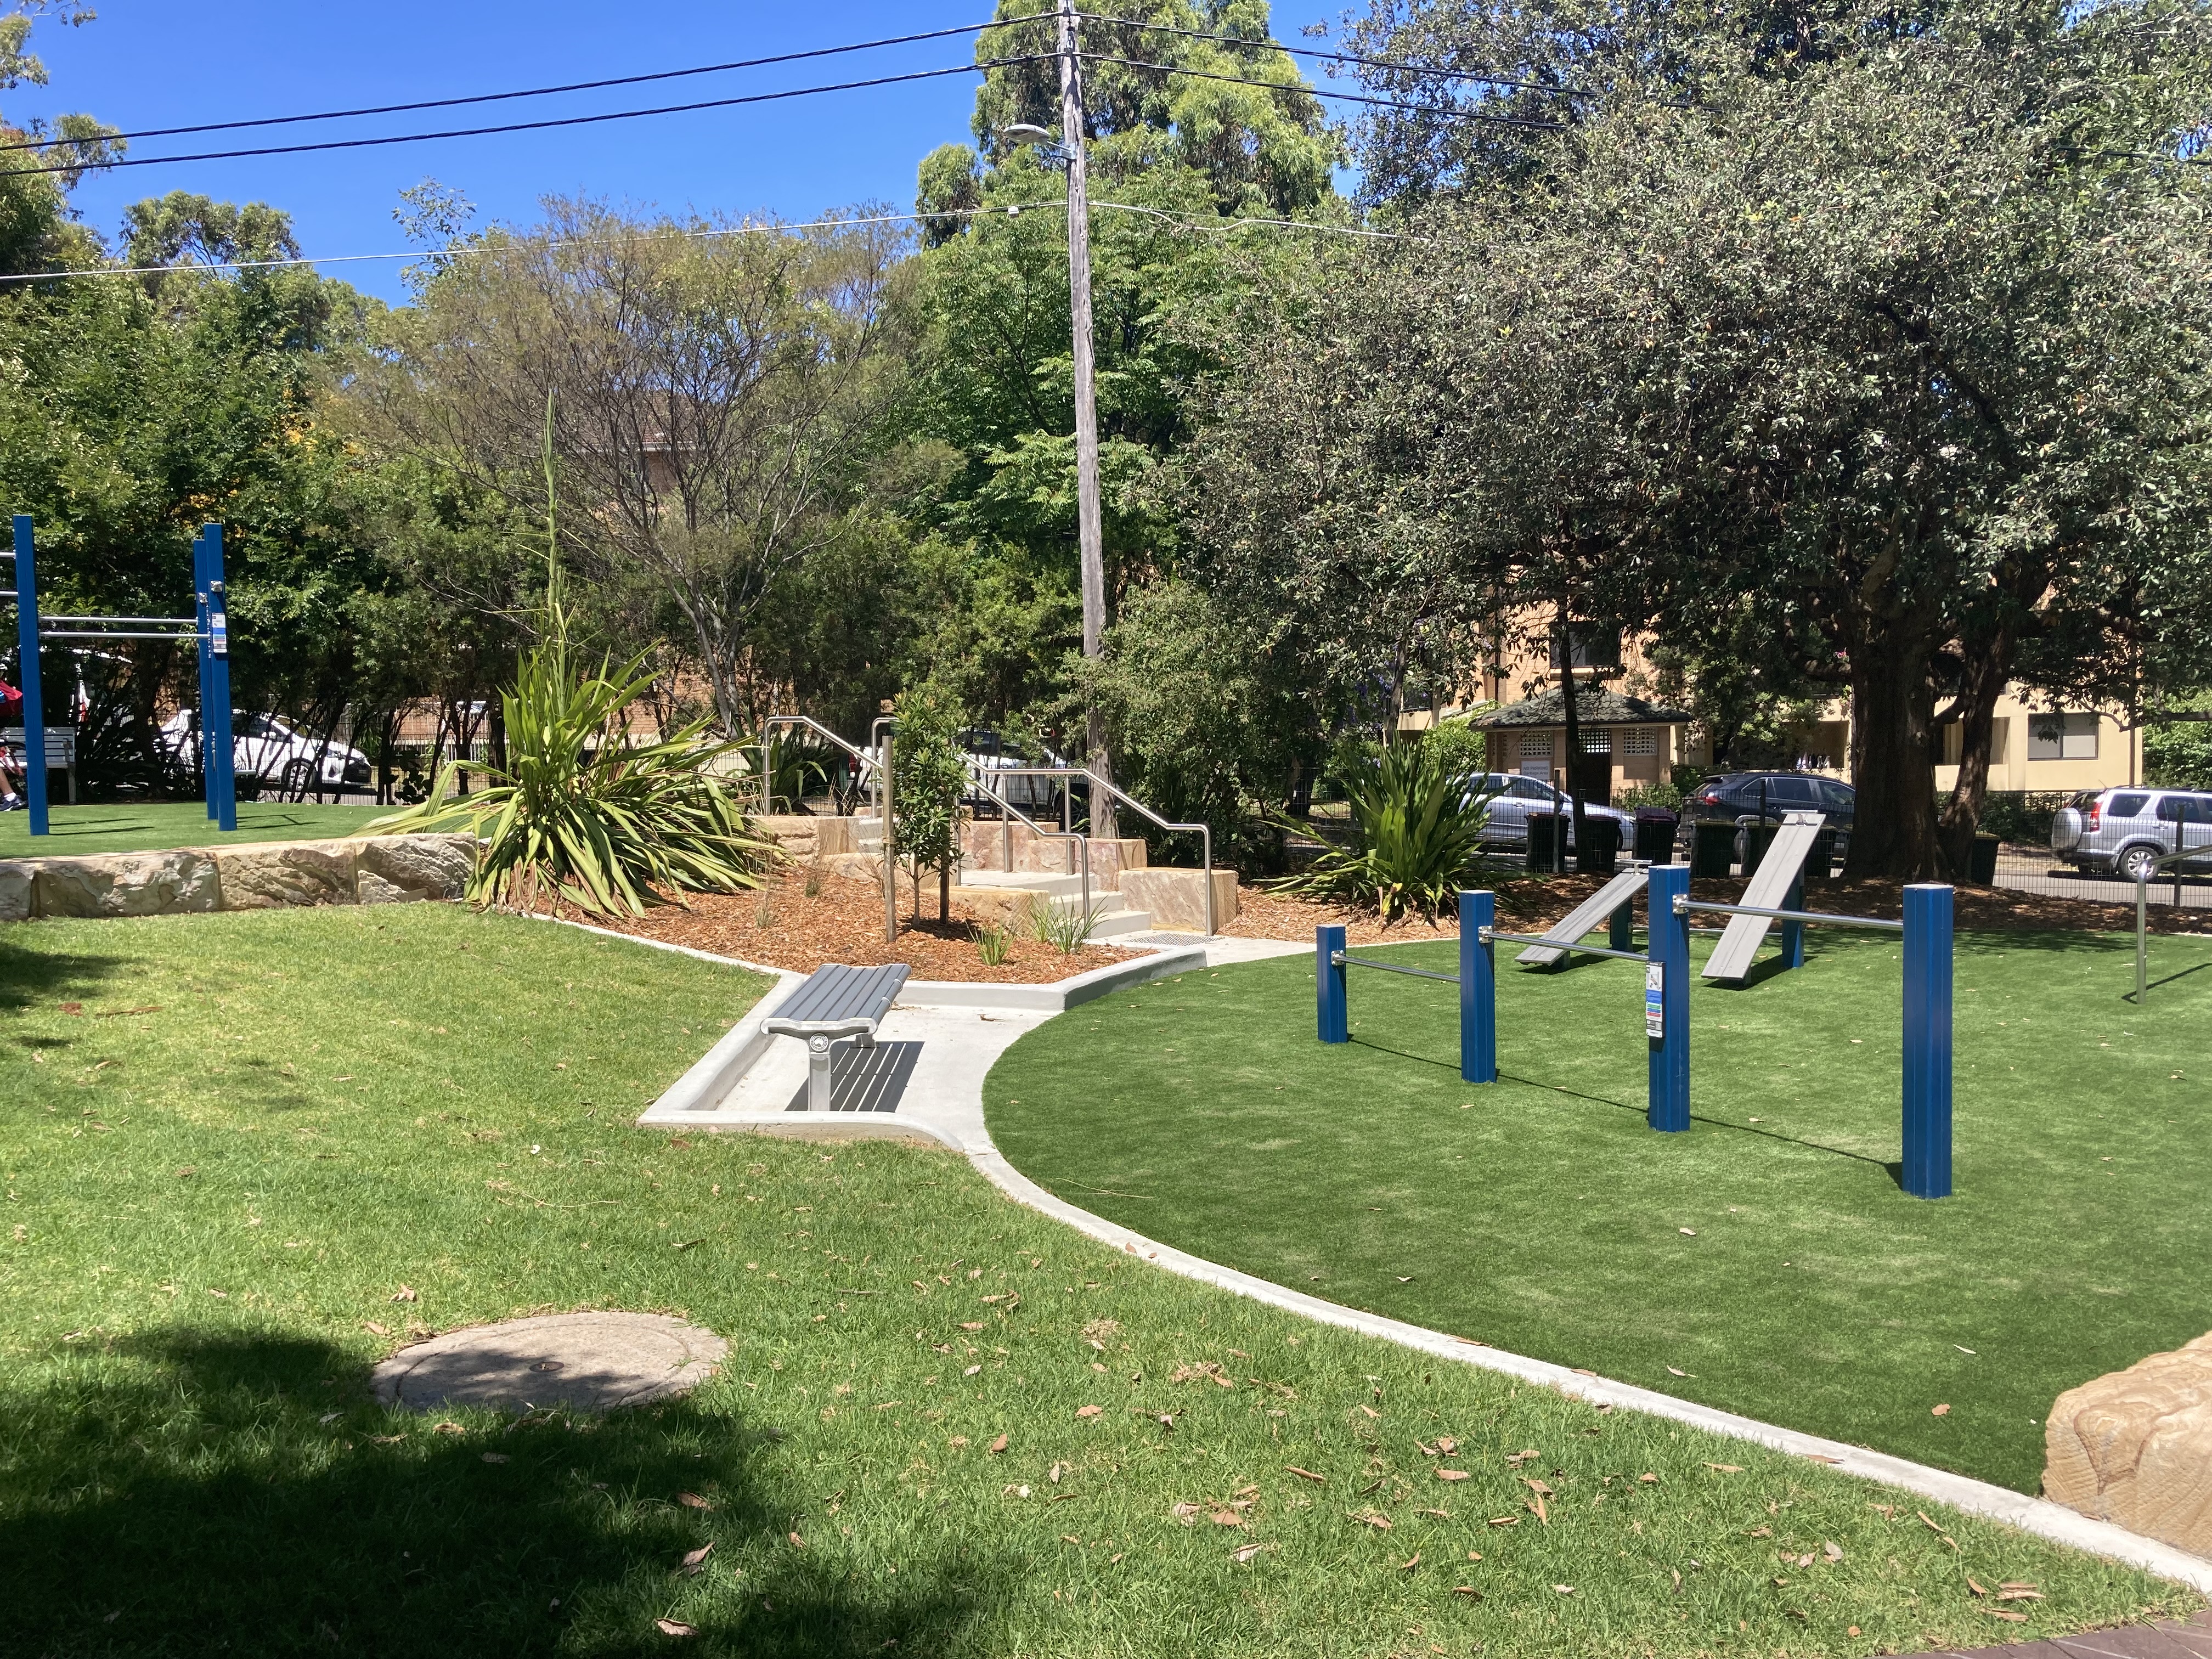 Shady park with fitness equipment